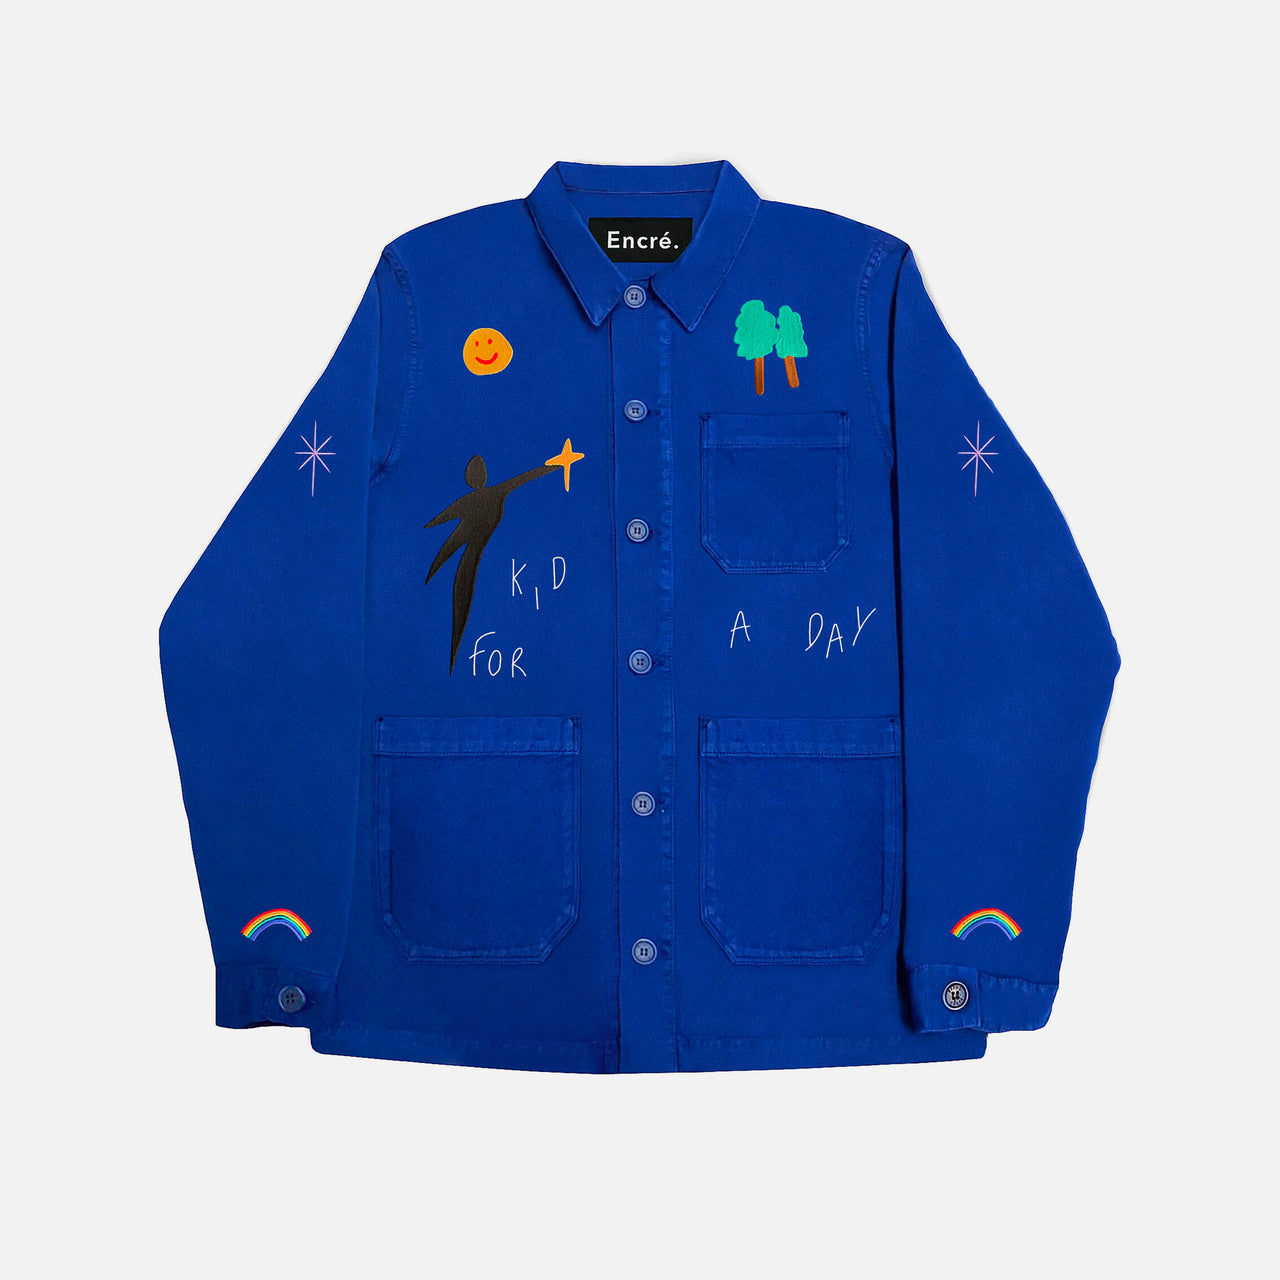 Kid For A Day Jacket